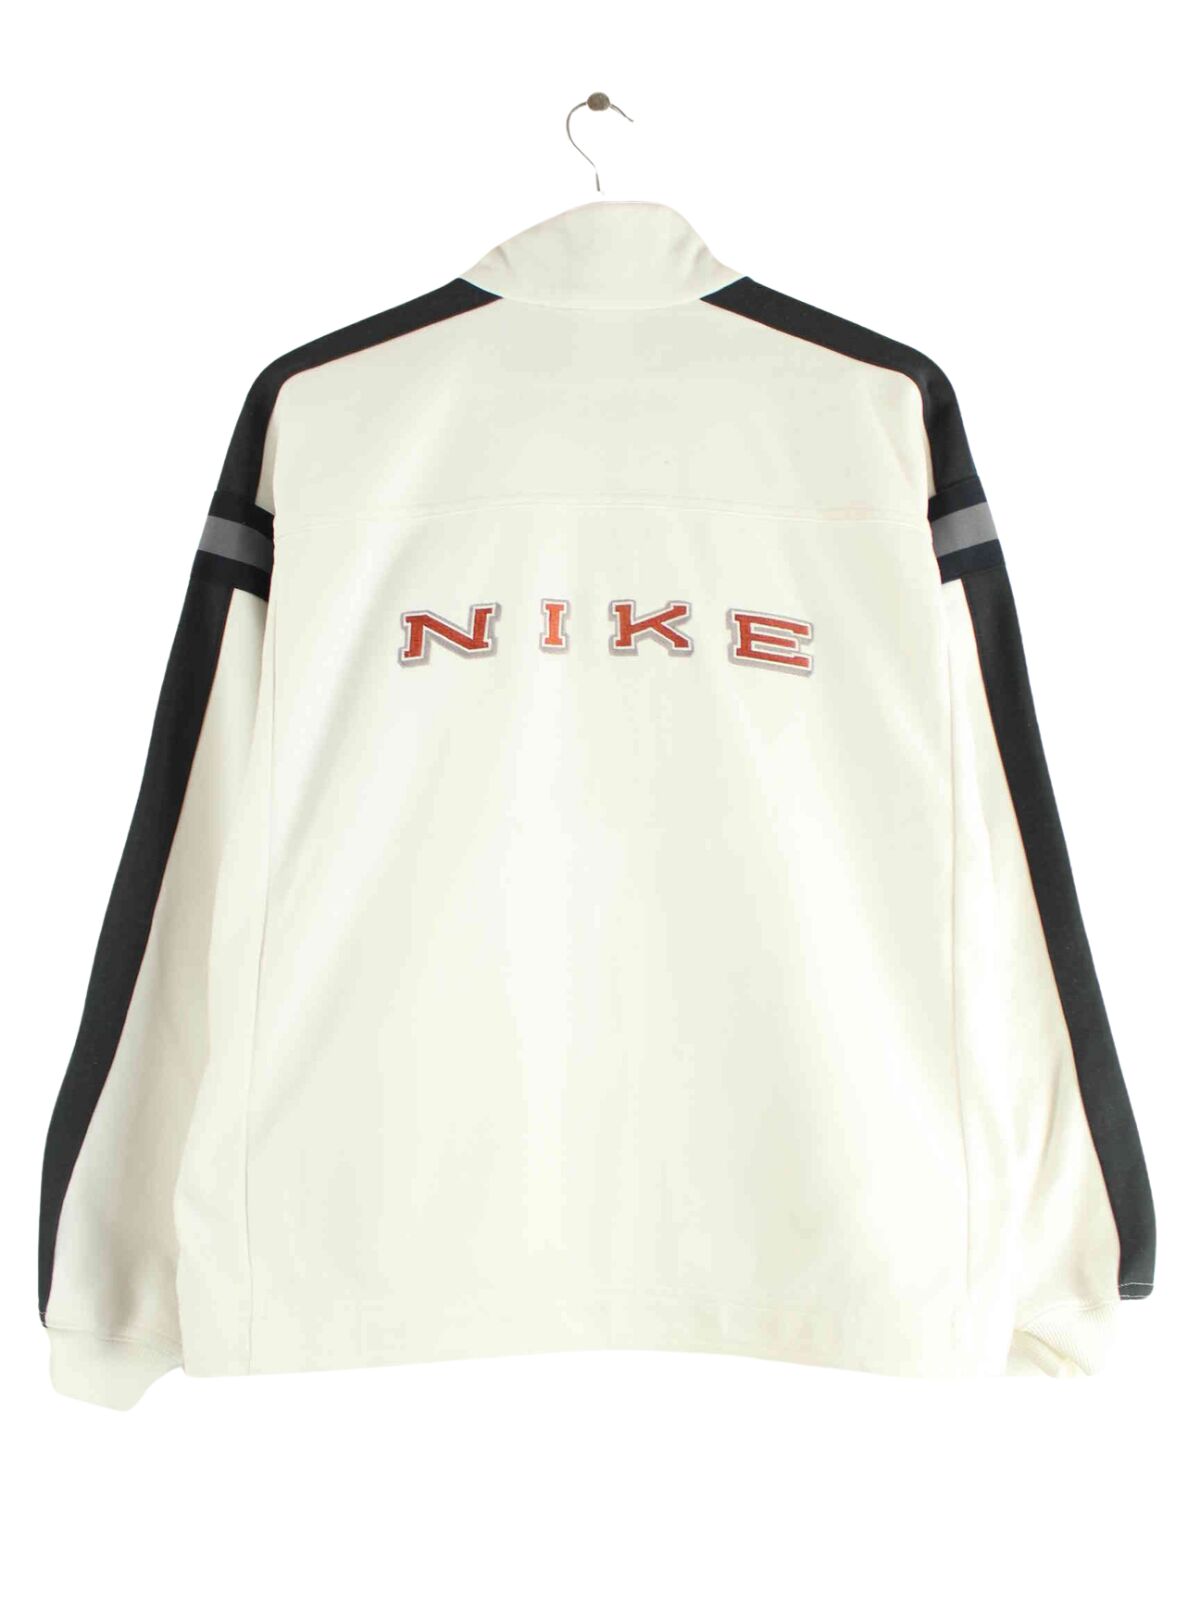 Nike 90s Vintage Spellout Embroidered Trainingsjacke Weiß XS (back image)